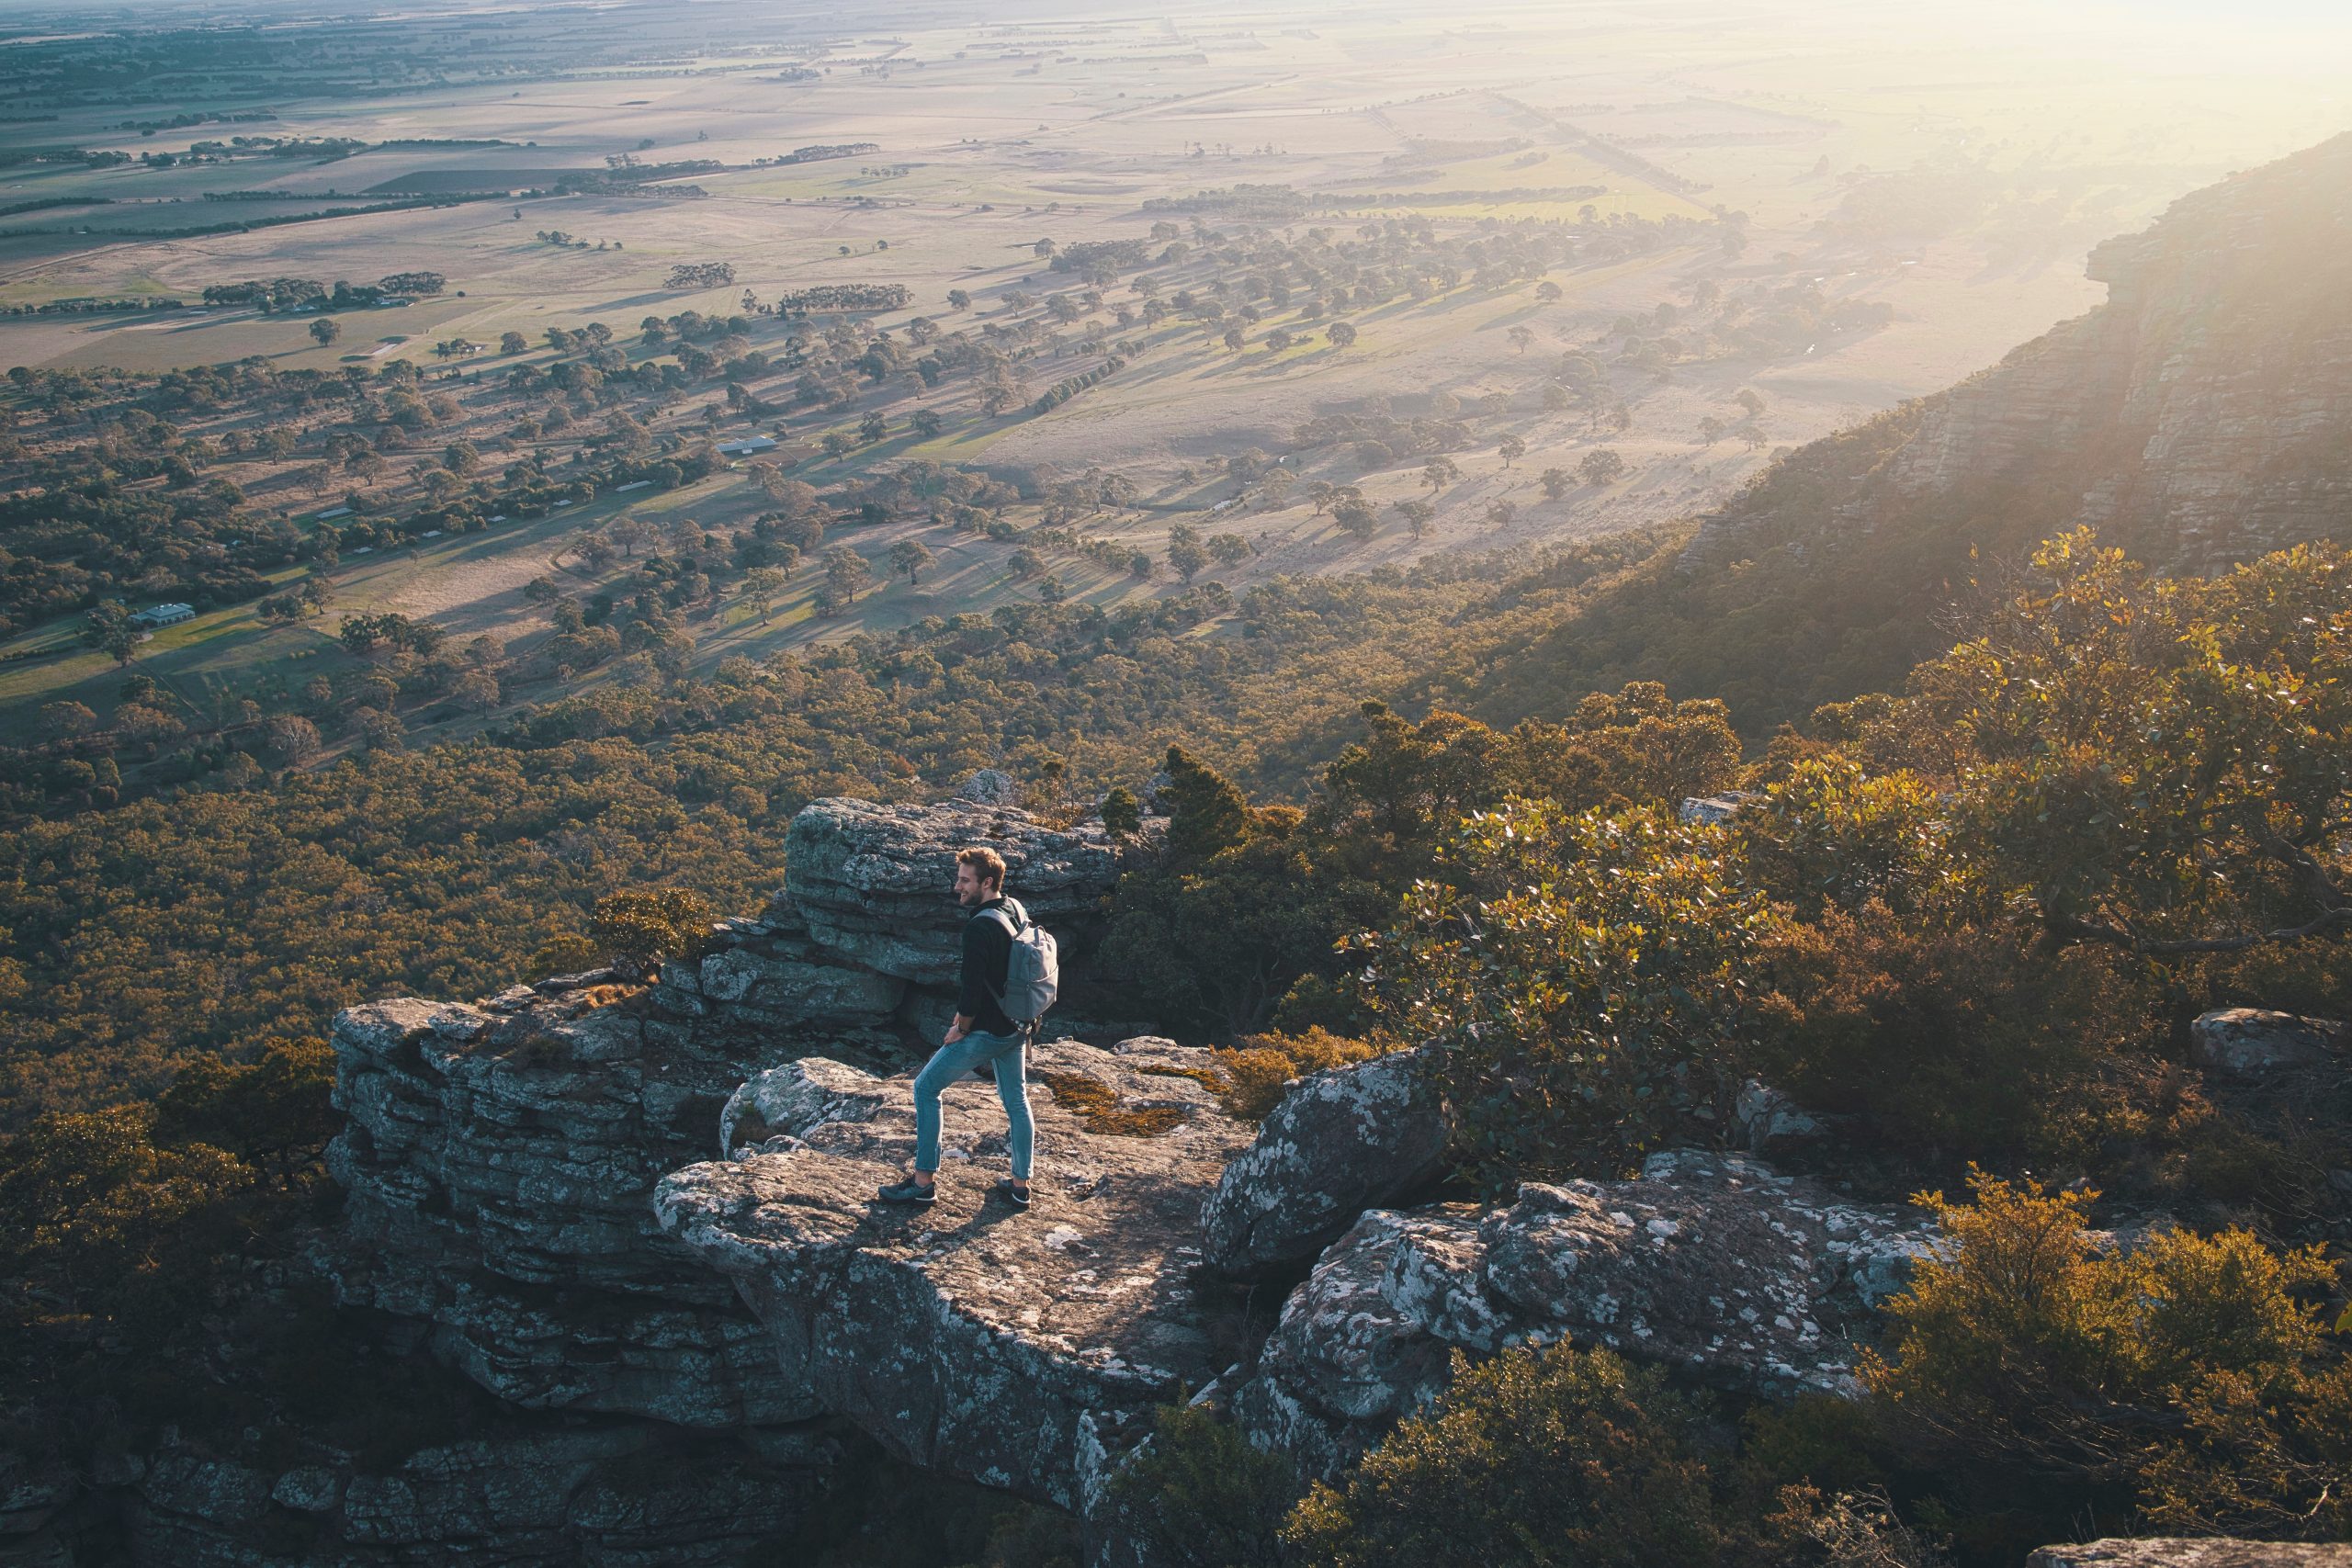 Young guy standing cliffside in Grampians National Park in Victoria, Australia overlooking a valley.